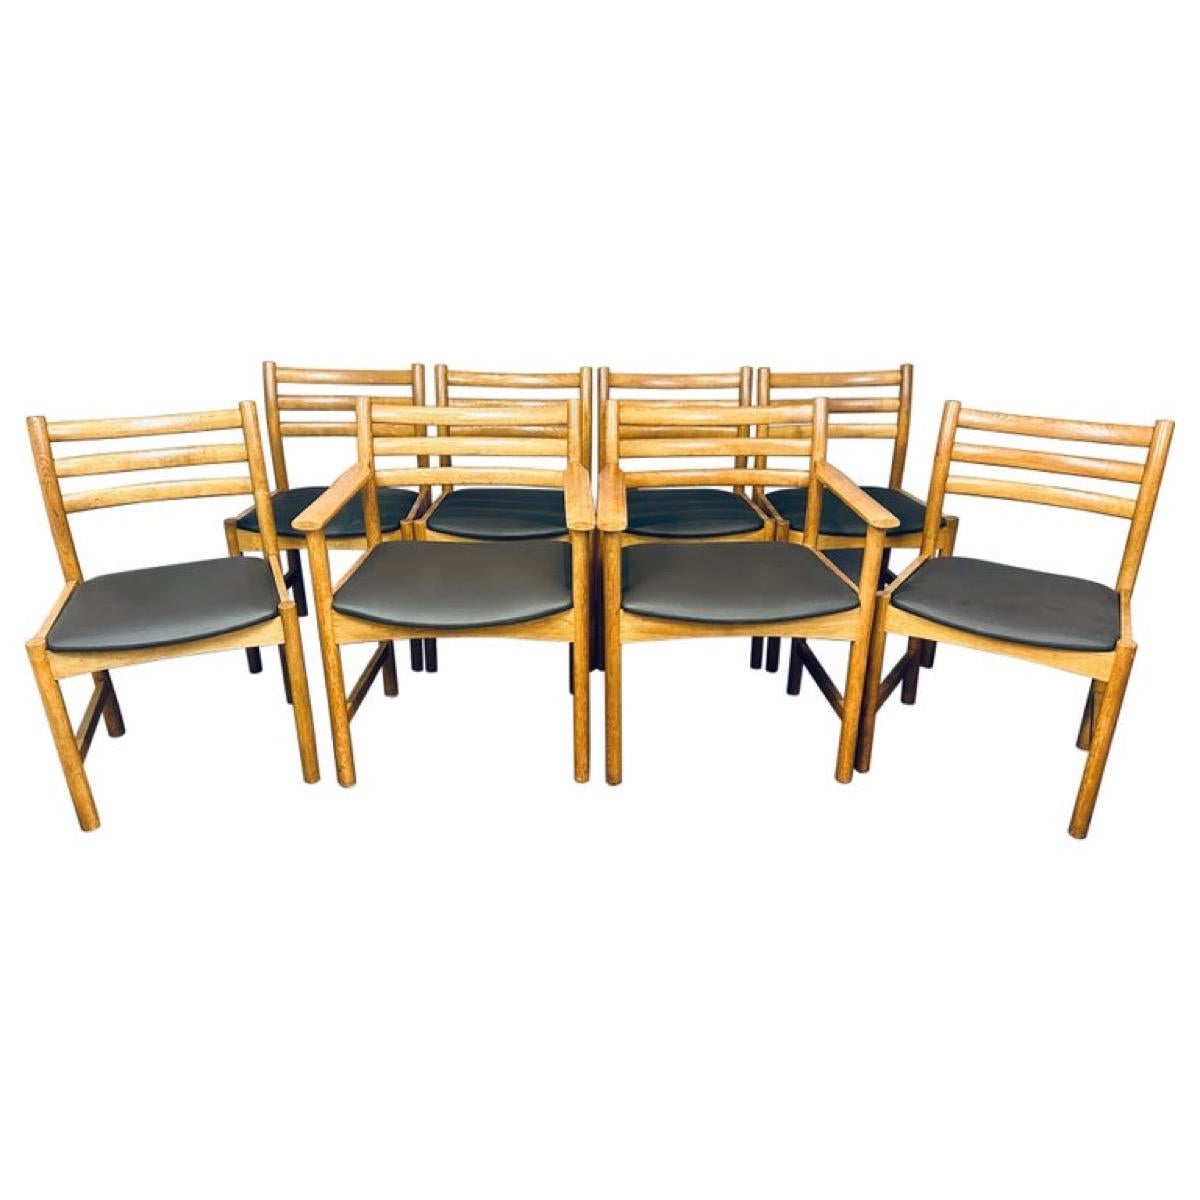 A very sturdy, well-made and functional Danish set of 6 ladder-back dining chairs (Model 350) and 2 ladder-back armchairs/carvers (Model 351) designed by Poul Volther and manufactured by Sorø Stolefabrik in the 1960s. Made from Oak and newly